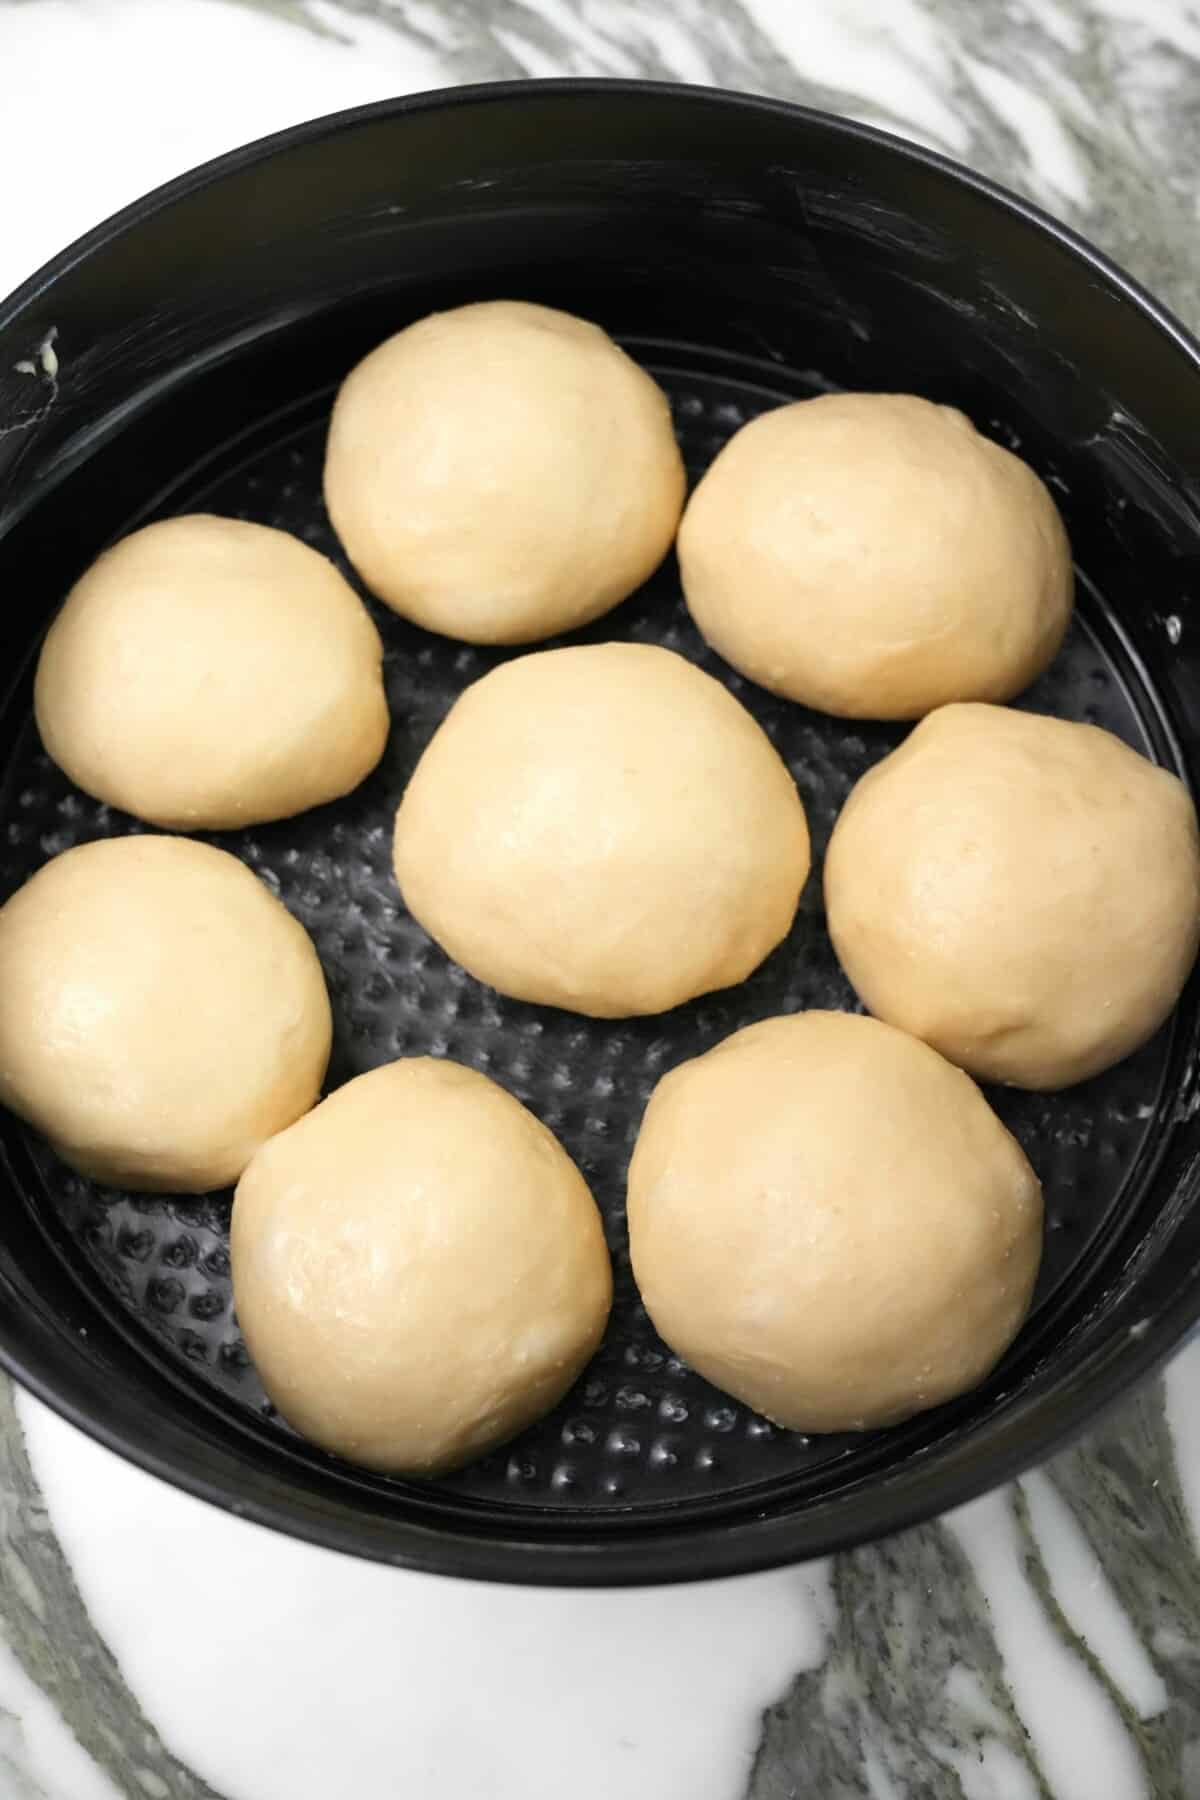 Bread dough rolled into balls and proofing in a baking tin.